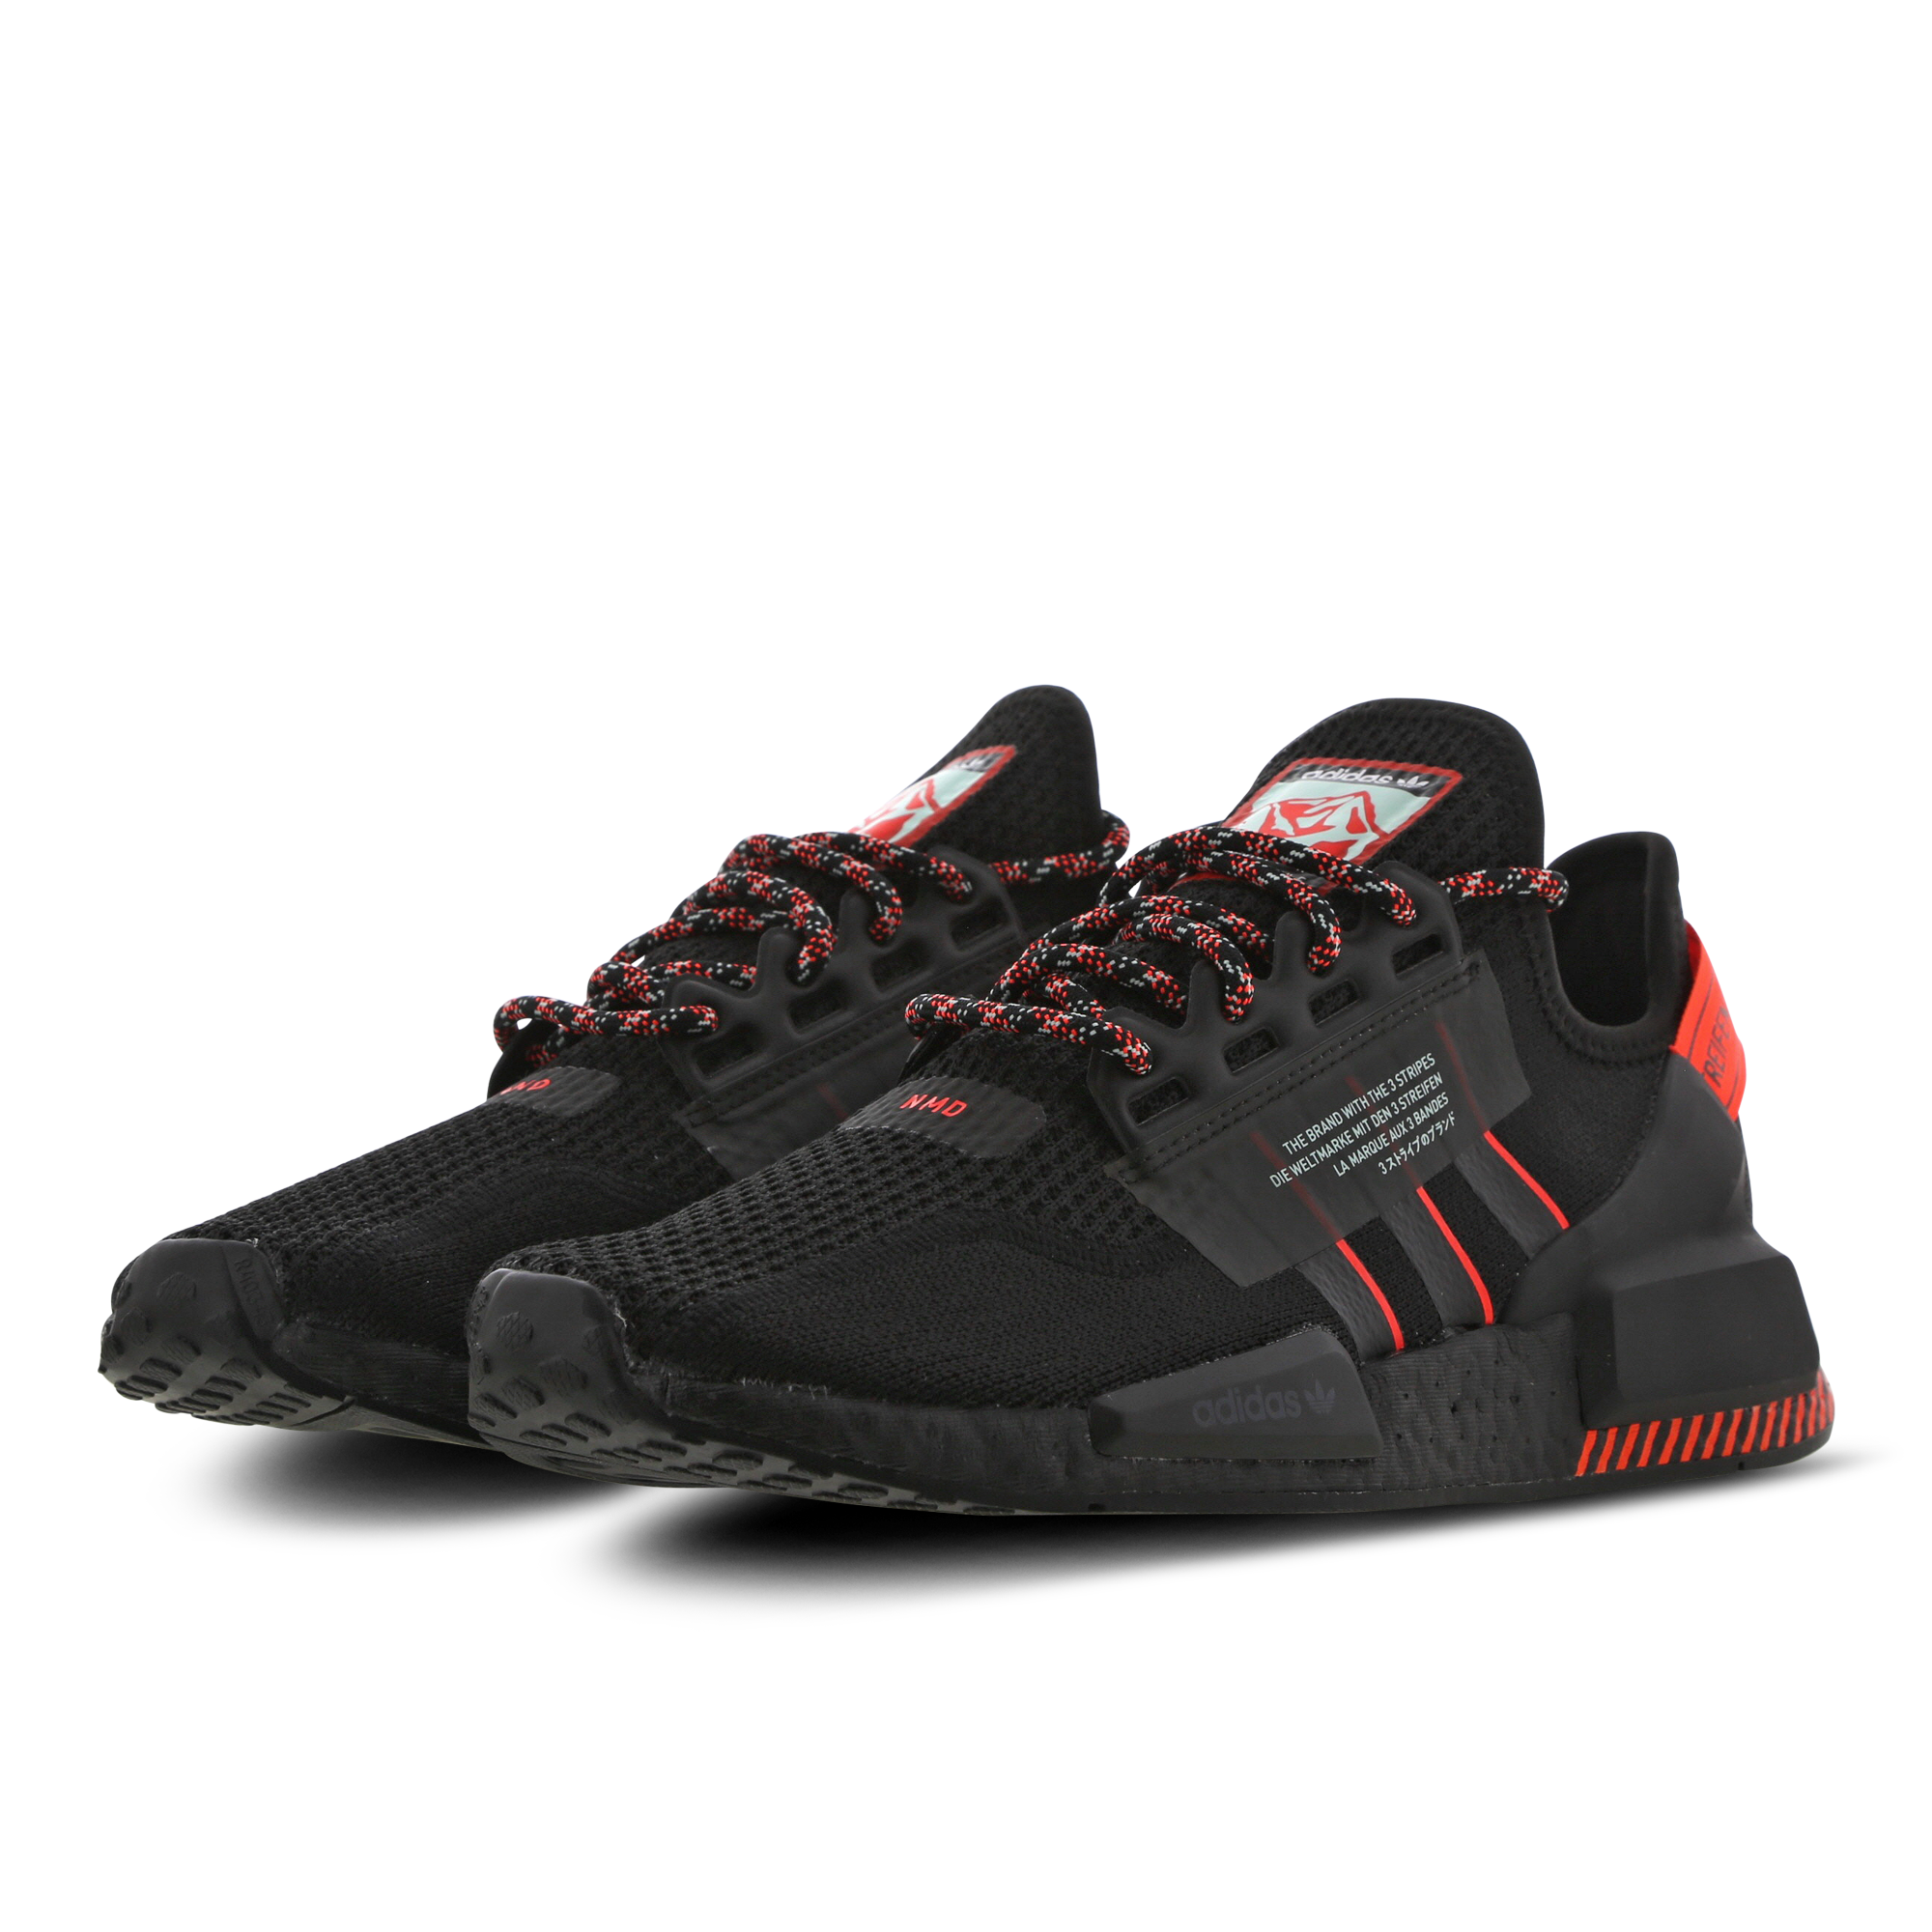 Adidas NMD R1 Core Black Solar Red $ 5249 Free Shipping